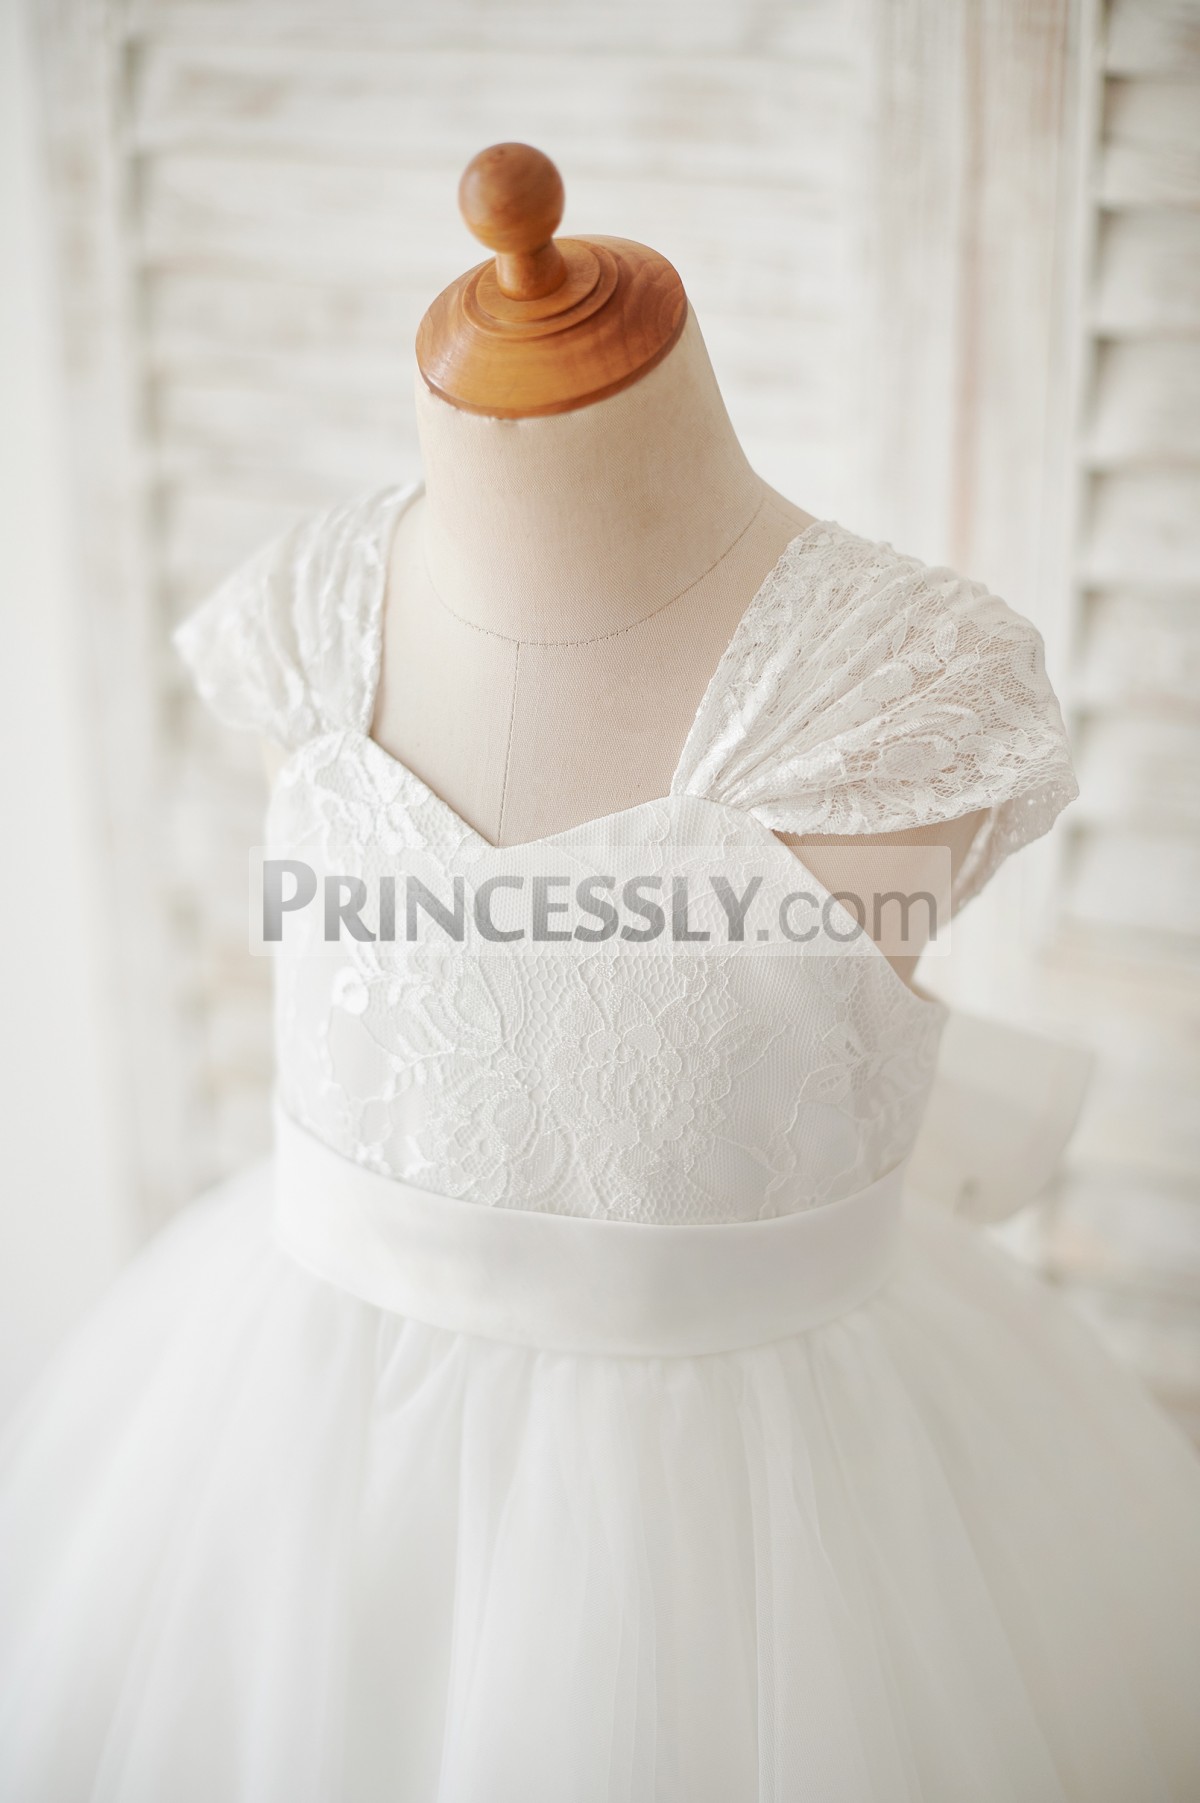 Princessly.com-K1003877-Cap Sleeves Ivory Lace Tulle Wedding Flower Girl Dress with Big Bow-31